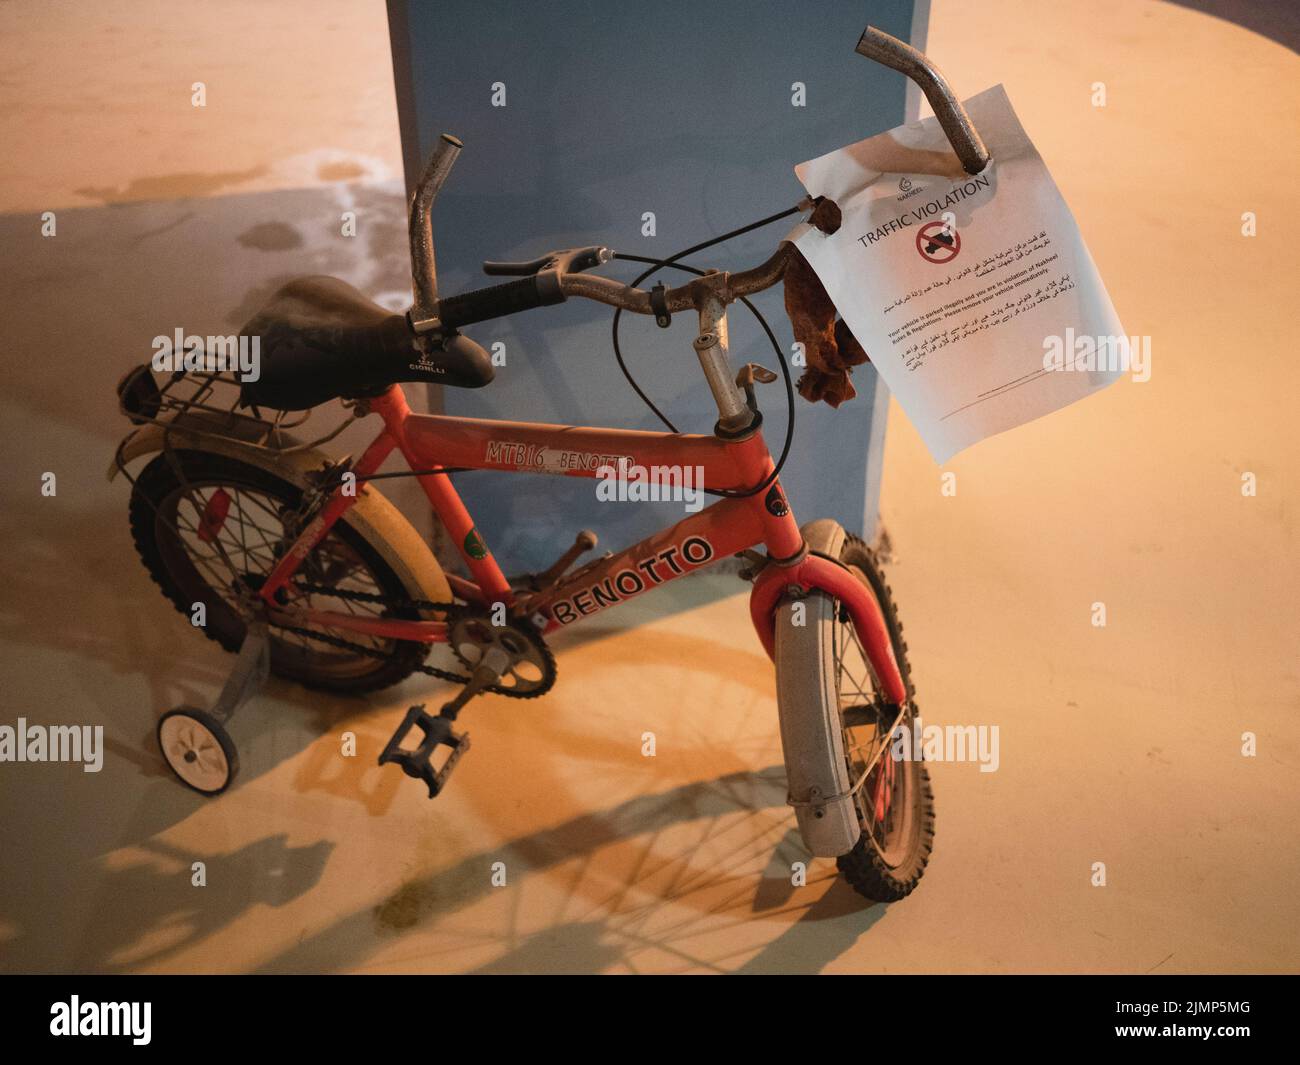 Infants bicycle with stabilisers and traffic violation notice attached to handlebars, Dubai UAE, United Arab Emirates, Stock Photo